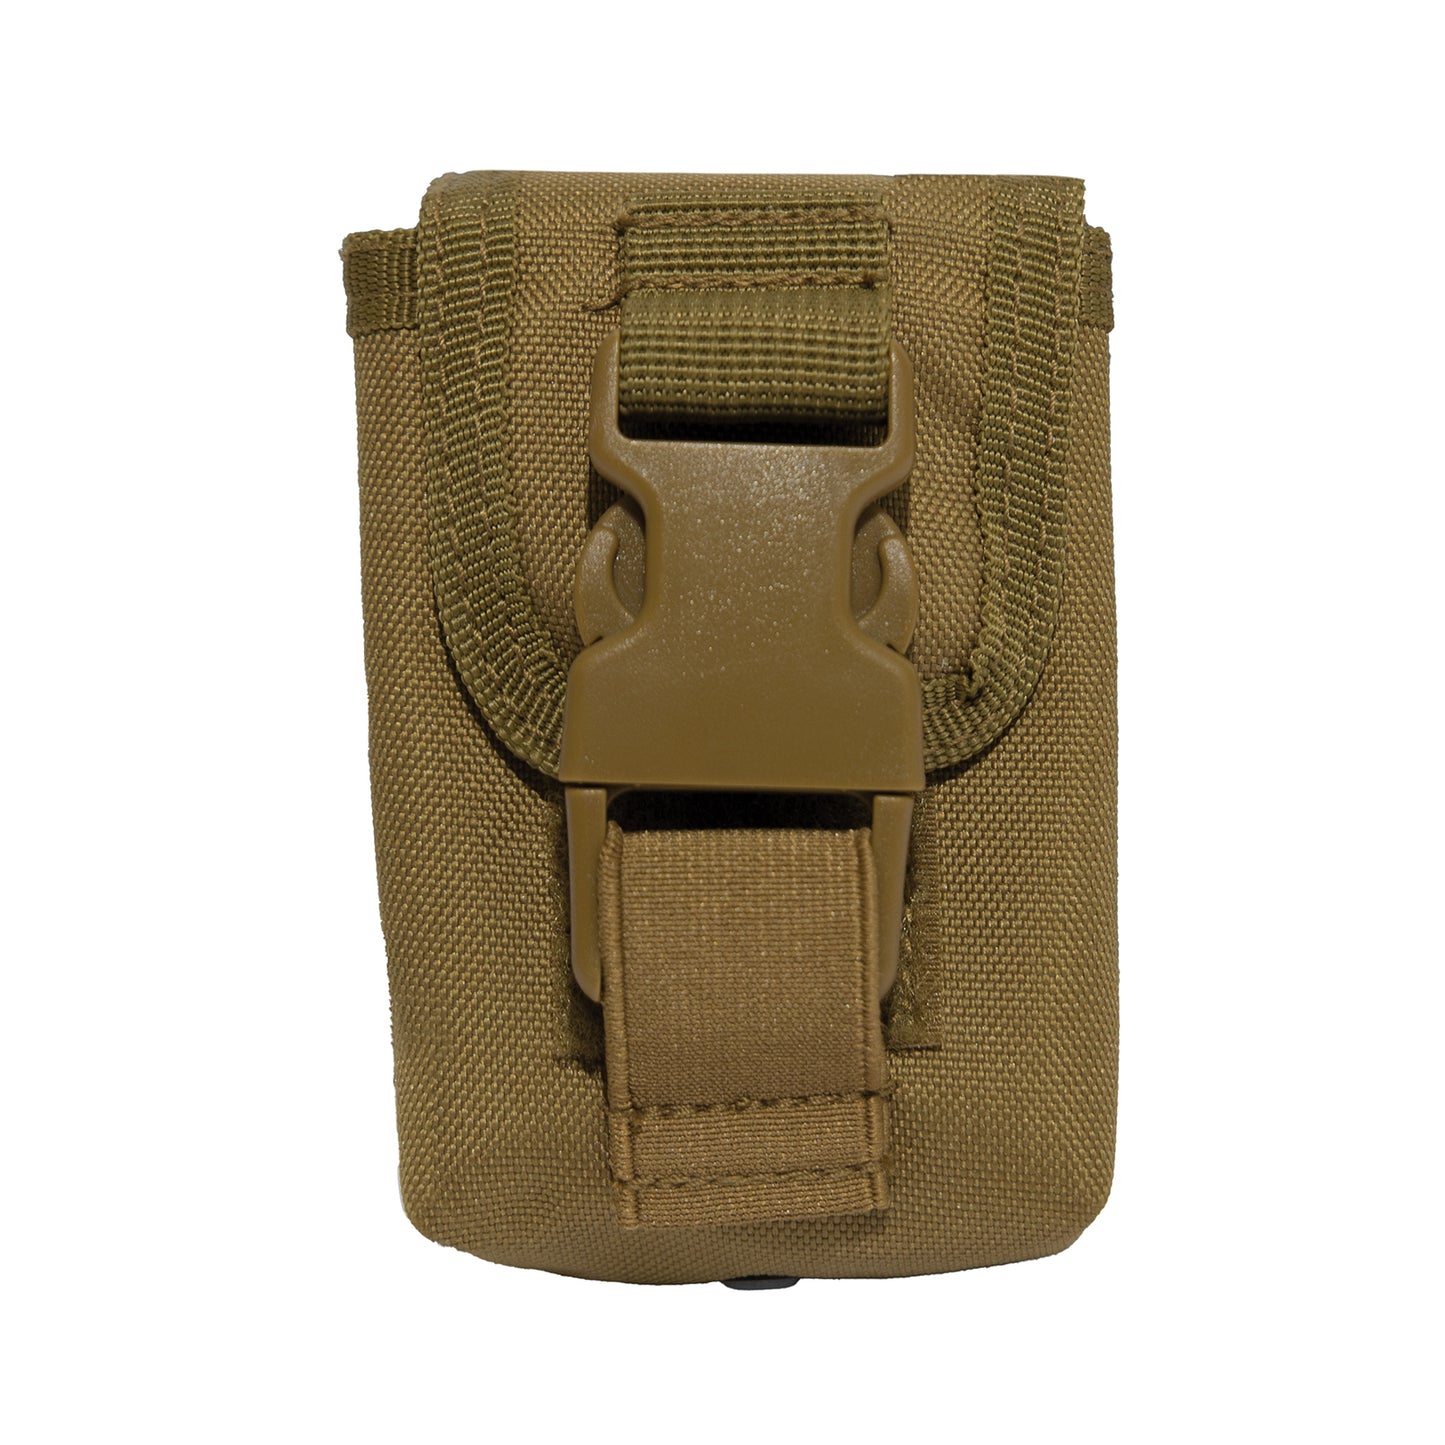 Tactical MOLLE Strobe GPS Compass Utility Pouch